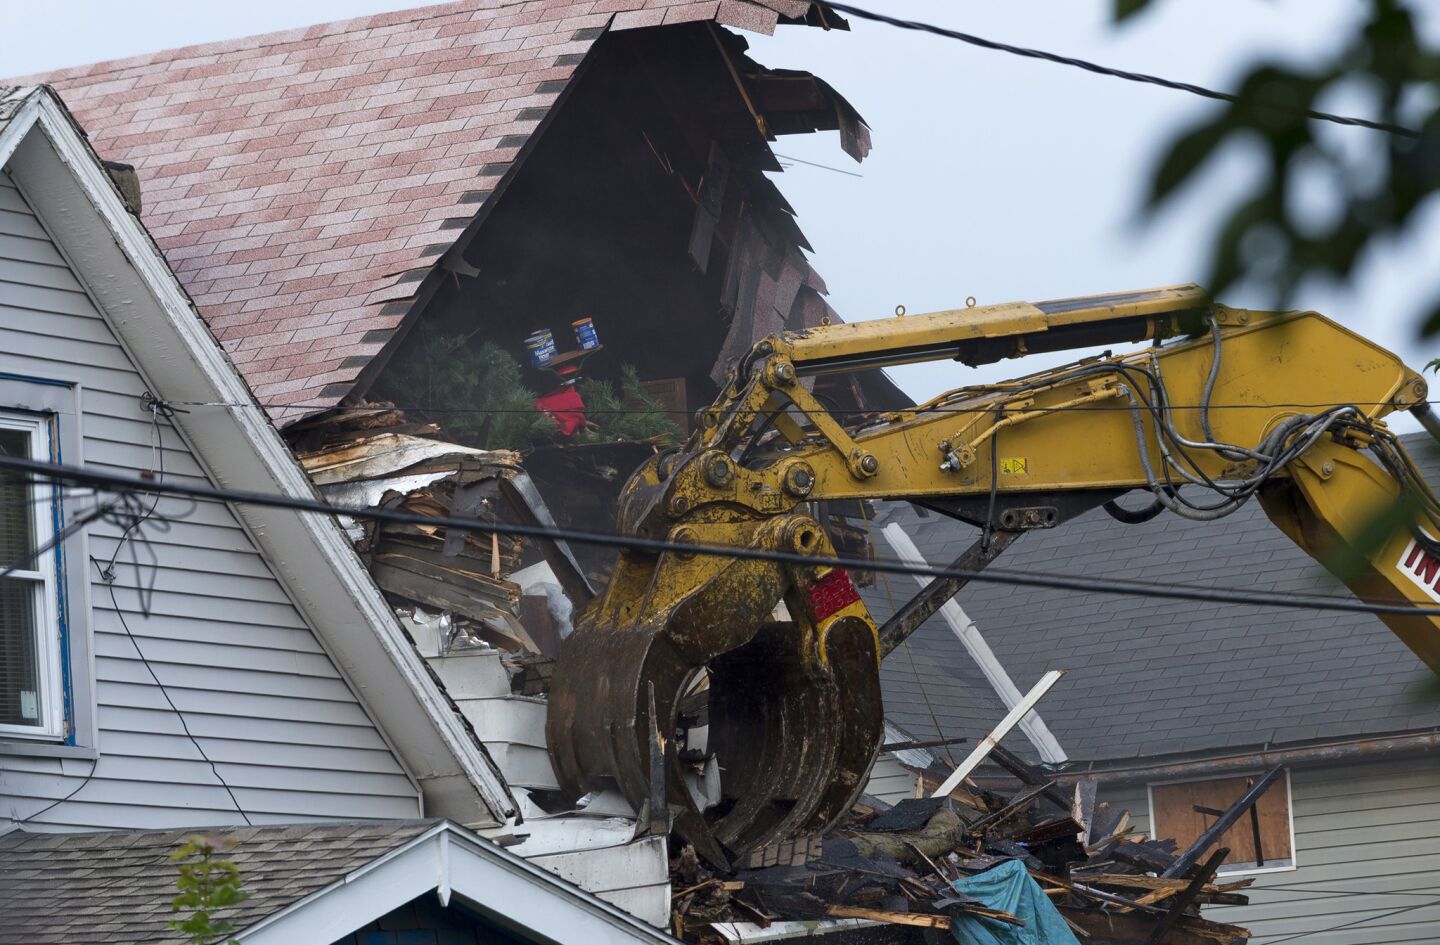 The attic of Ariel Castro's home is torn open by an excavator, exposing personal items inside.